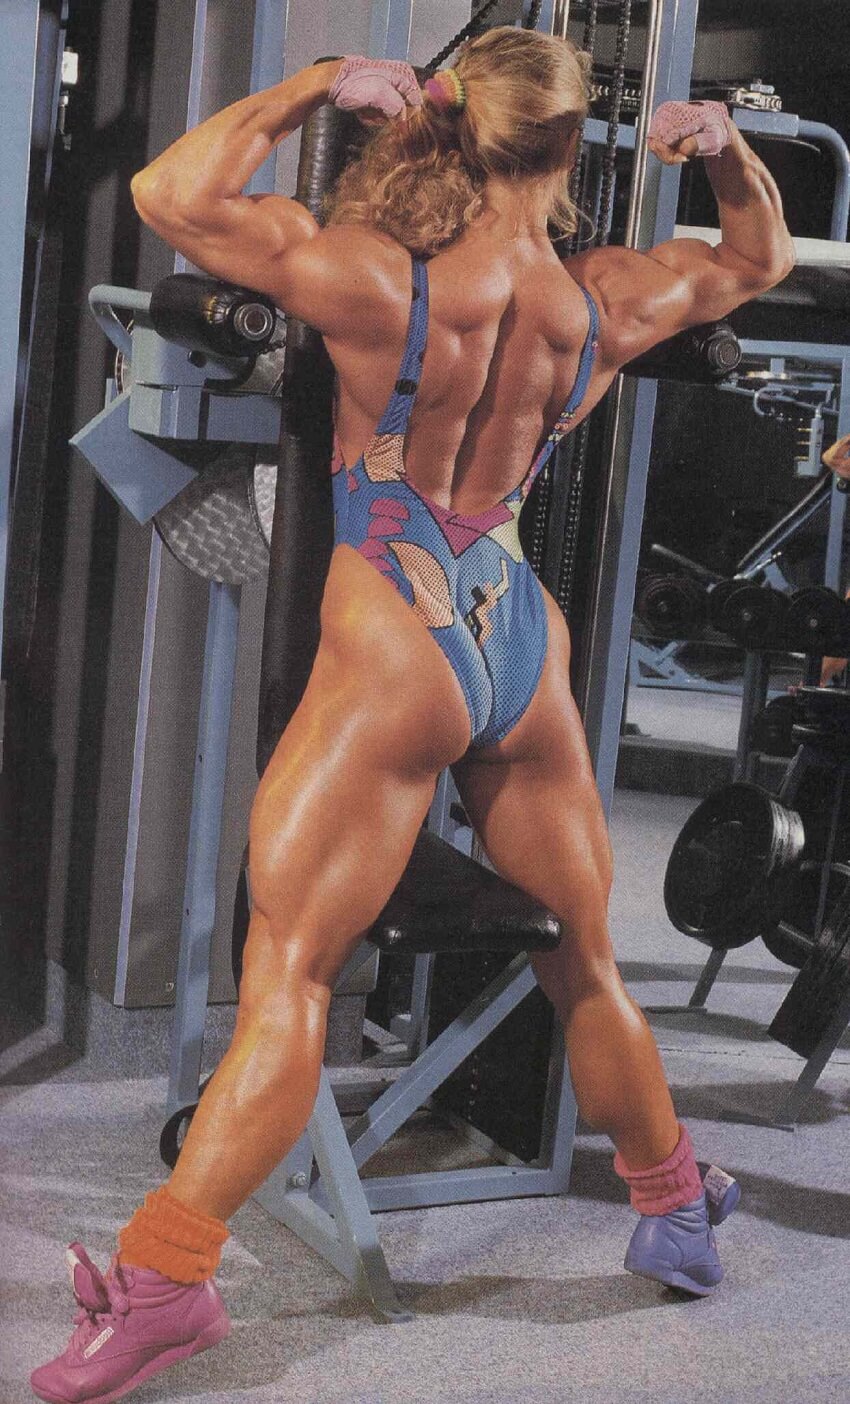 Anja Langer flexing her back and glutes for the photo in the gym